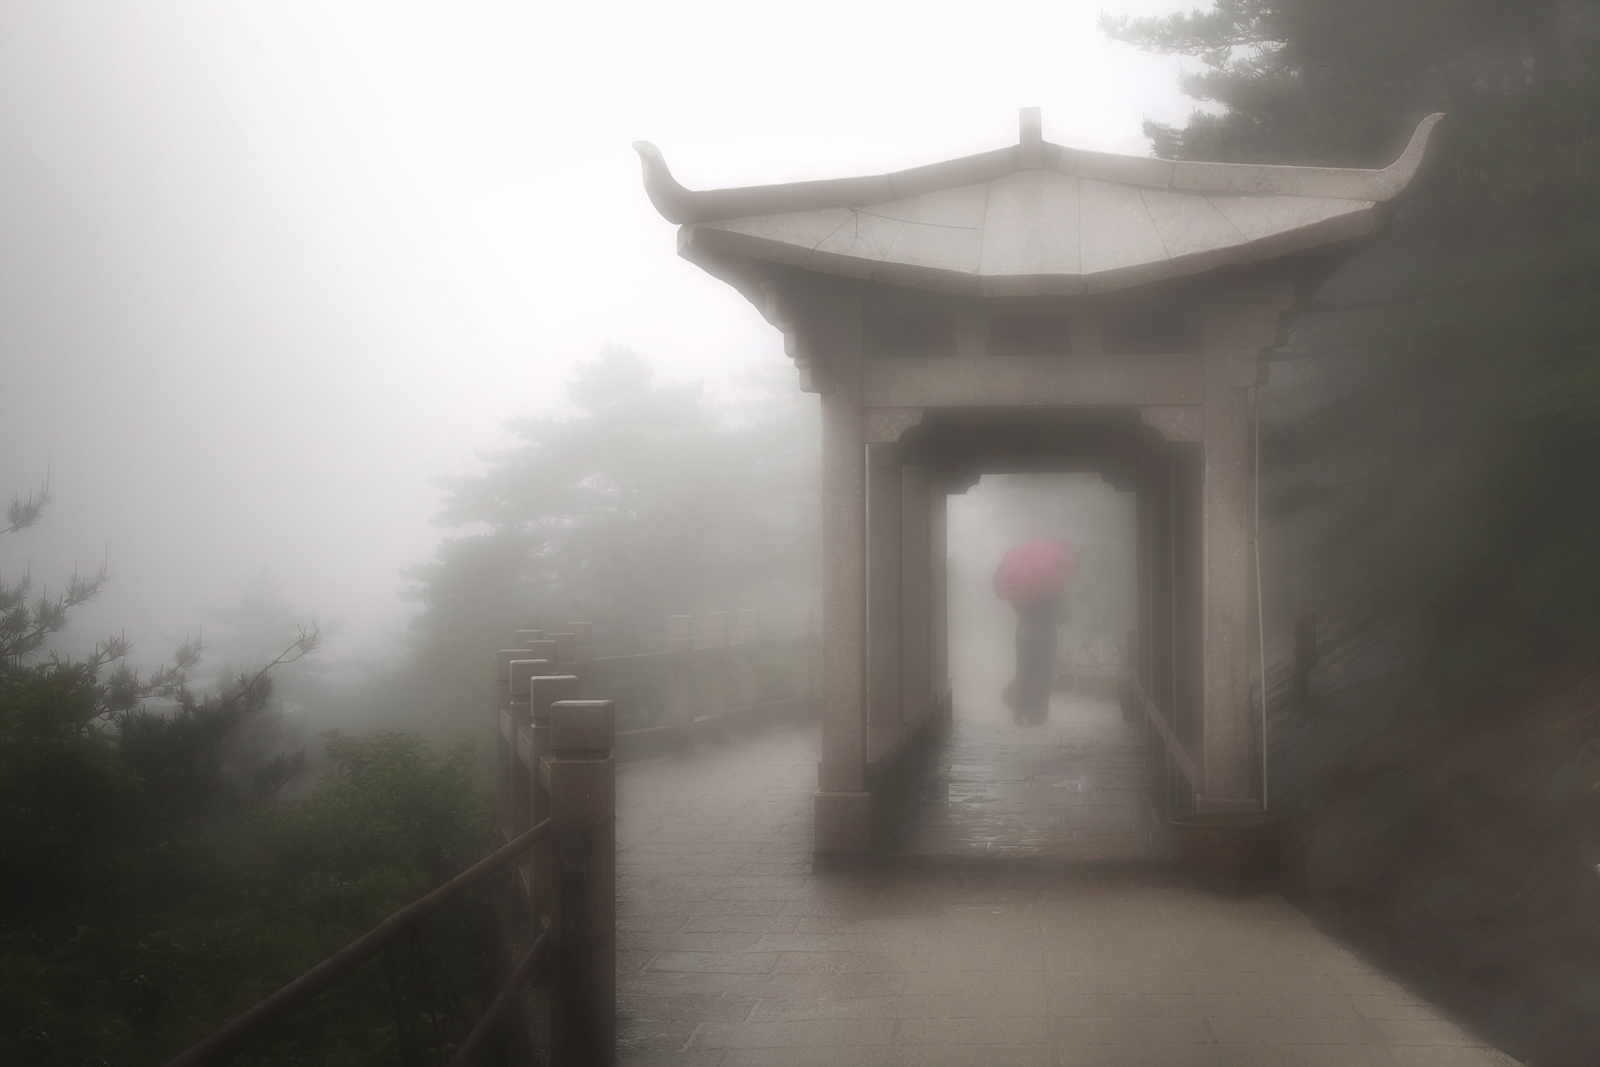 Woman with an umbrella through an archway on a foggy day in China